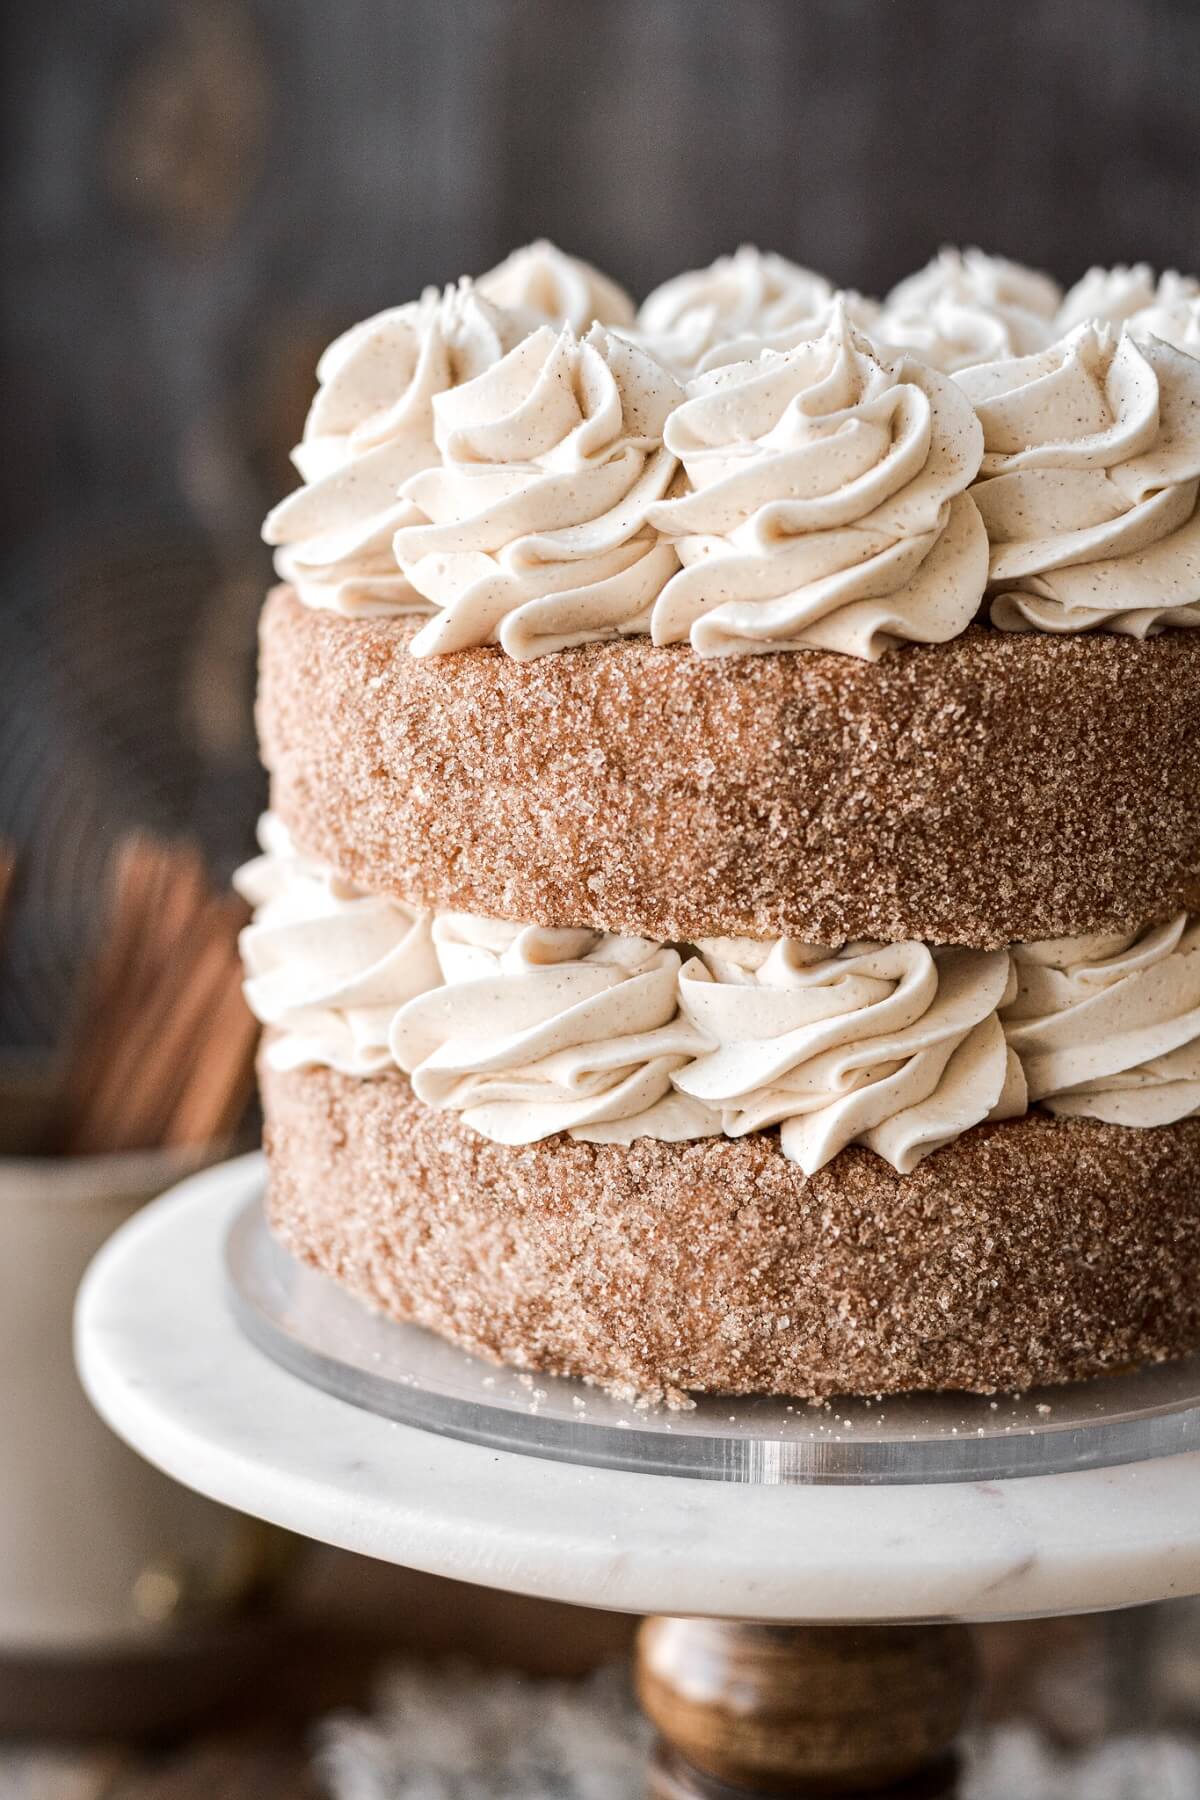 Layers of cinnamon cake coated in cinnamon sugar and filled with piped buttercream.